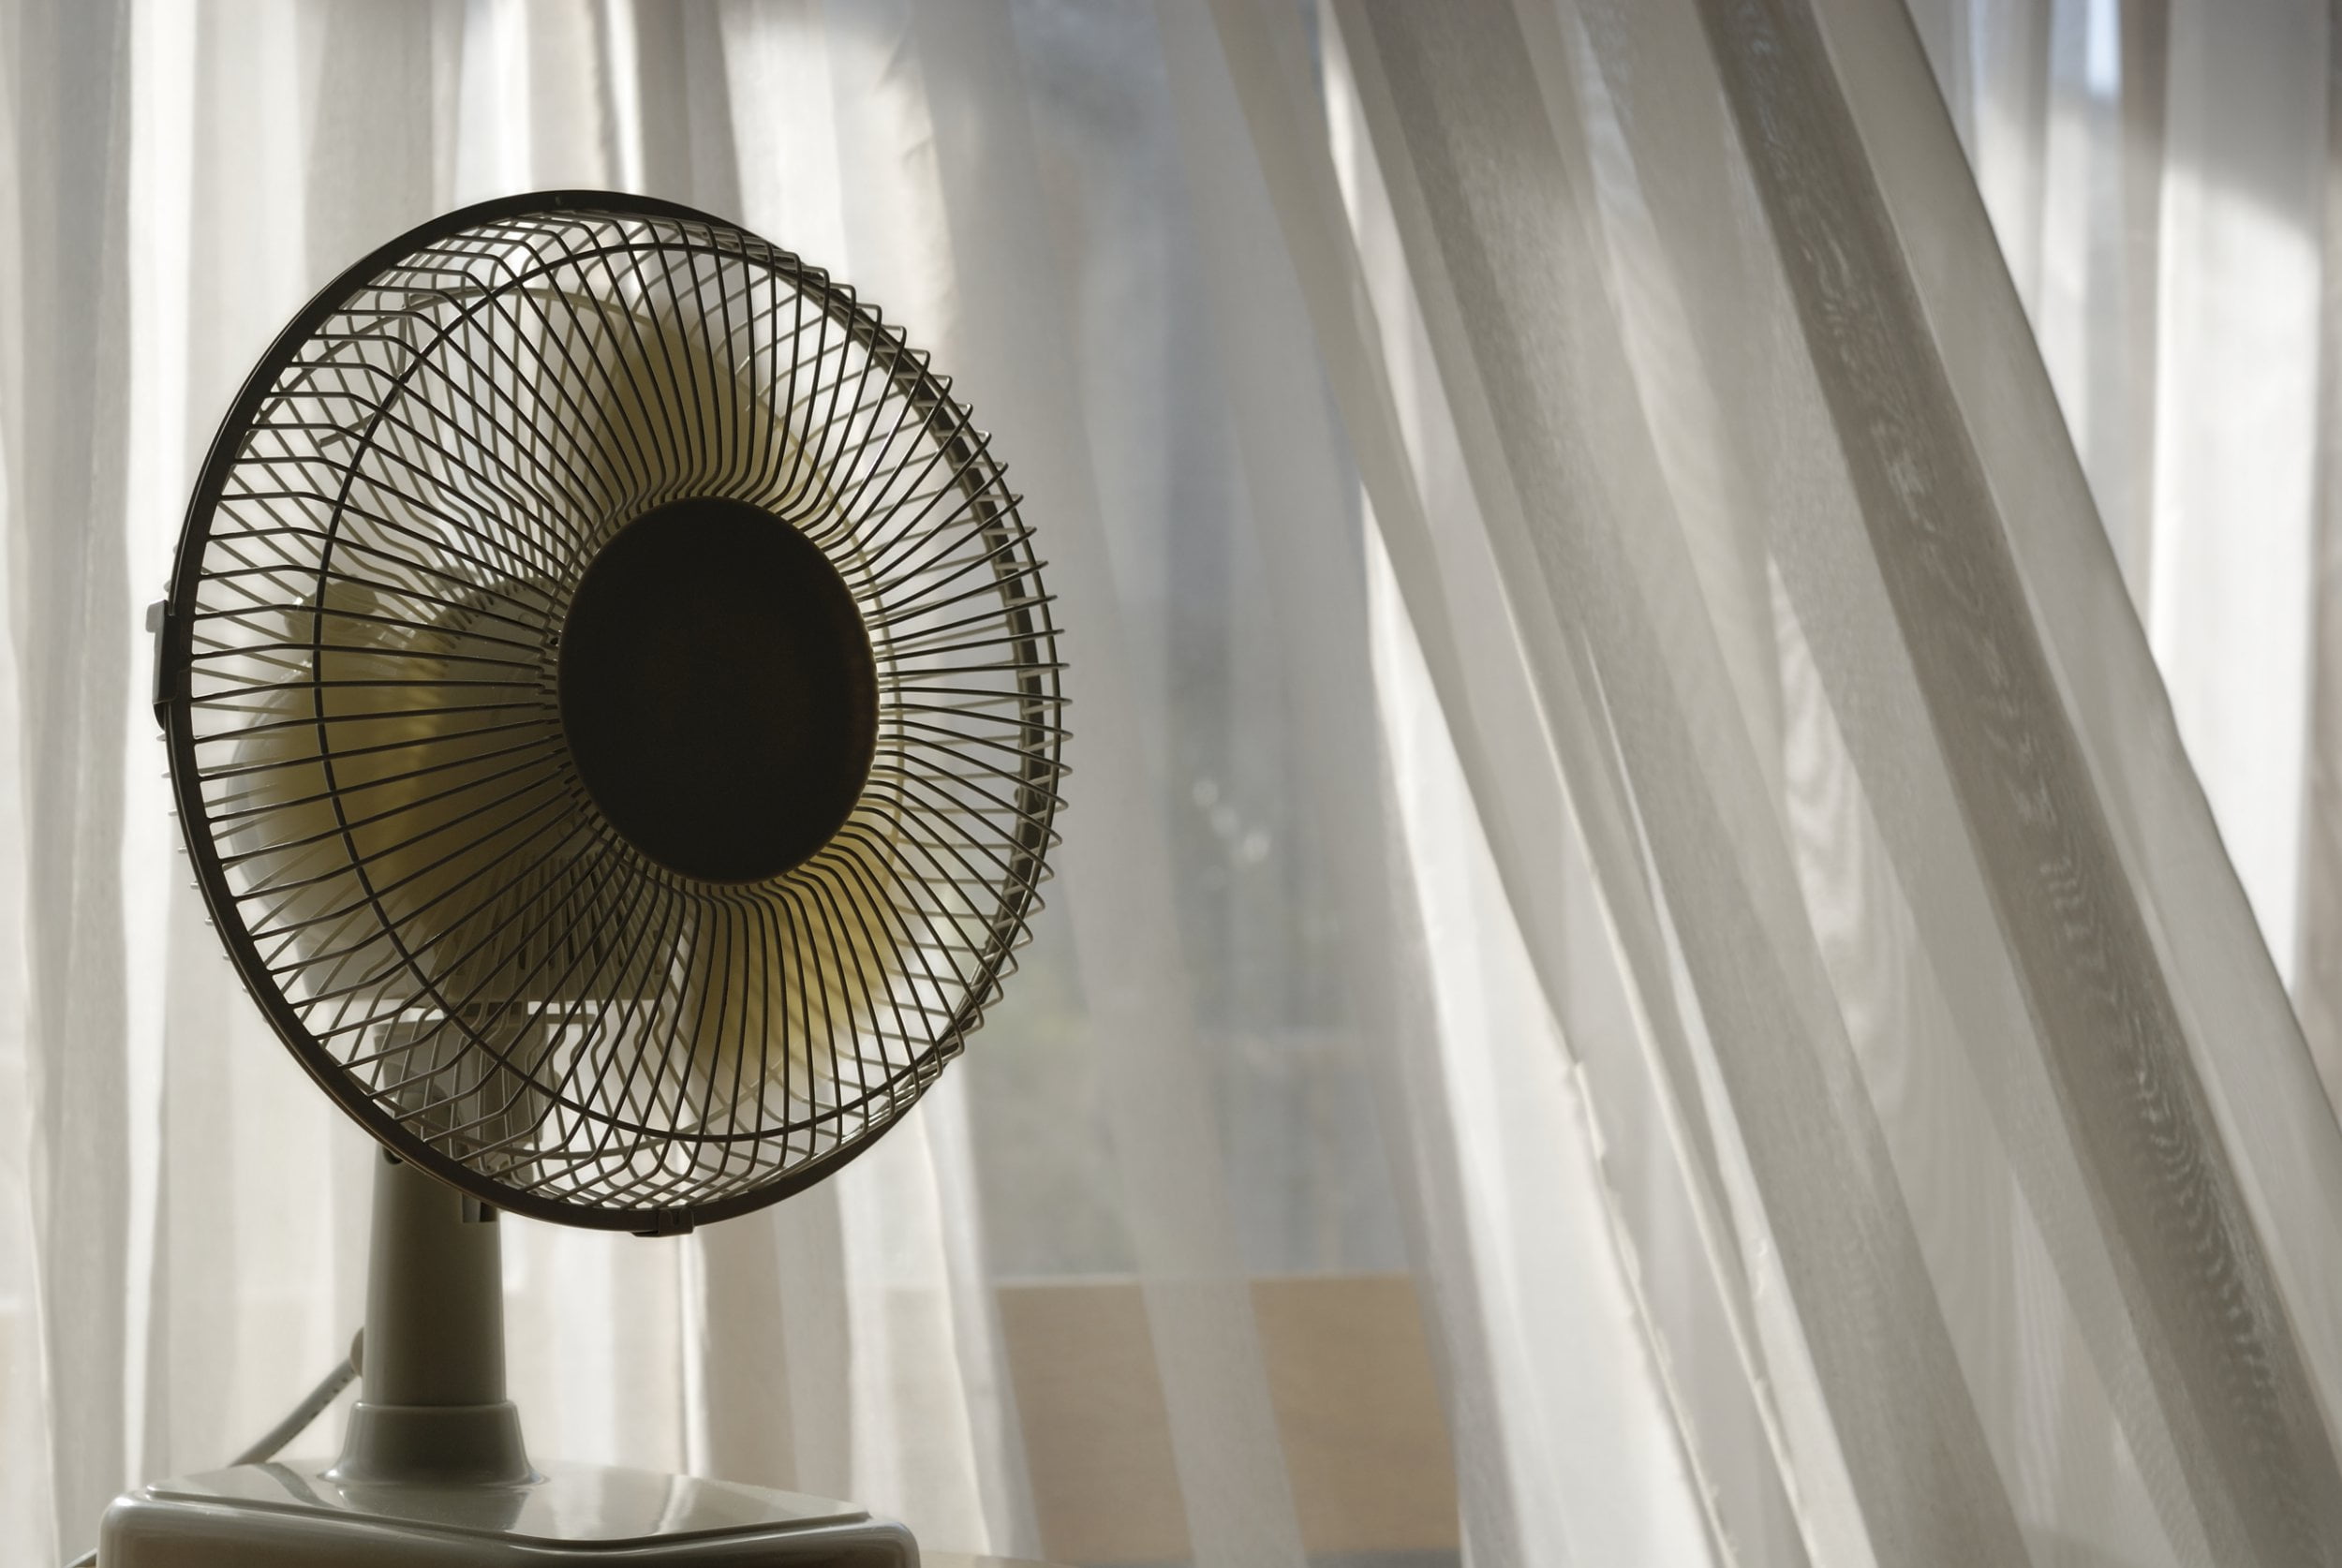 A fan that only cools itself